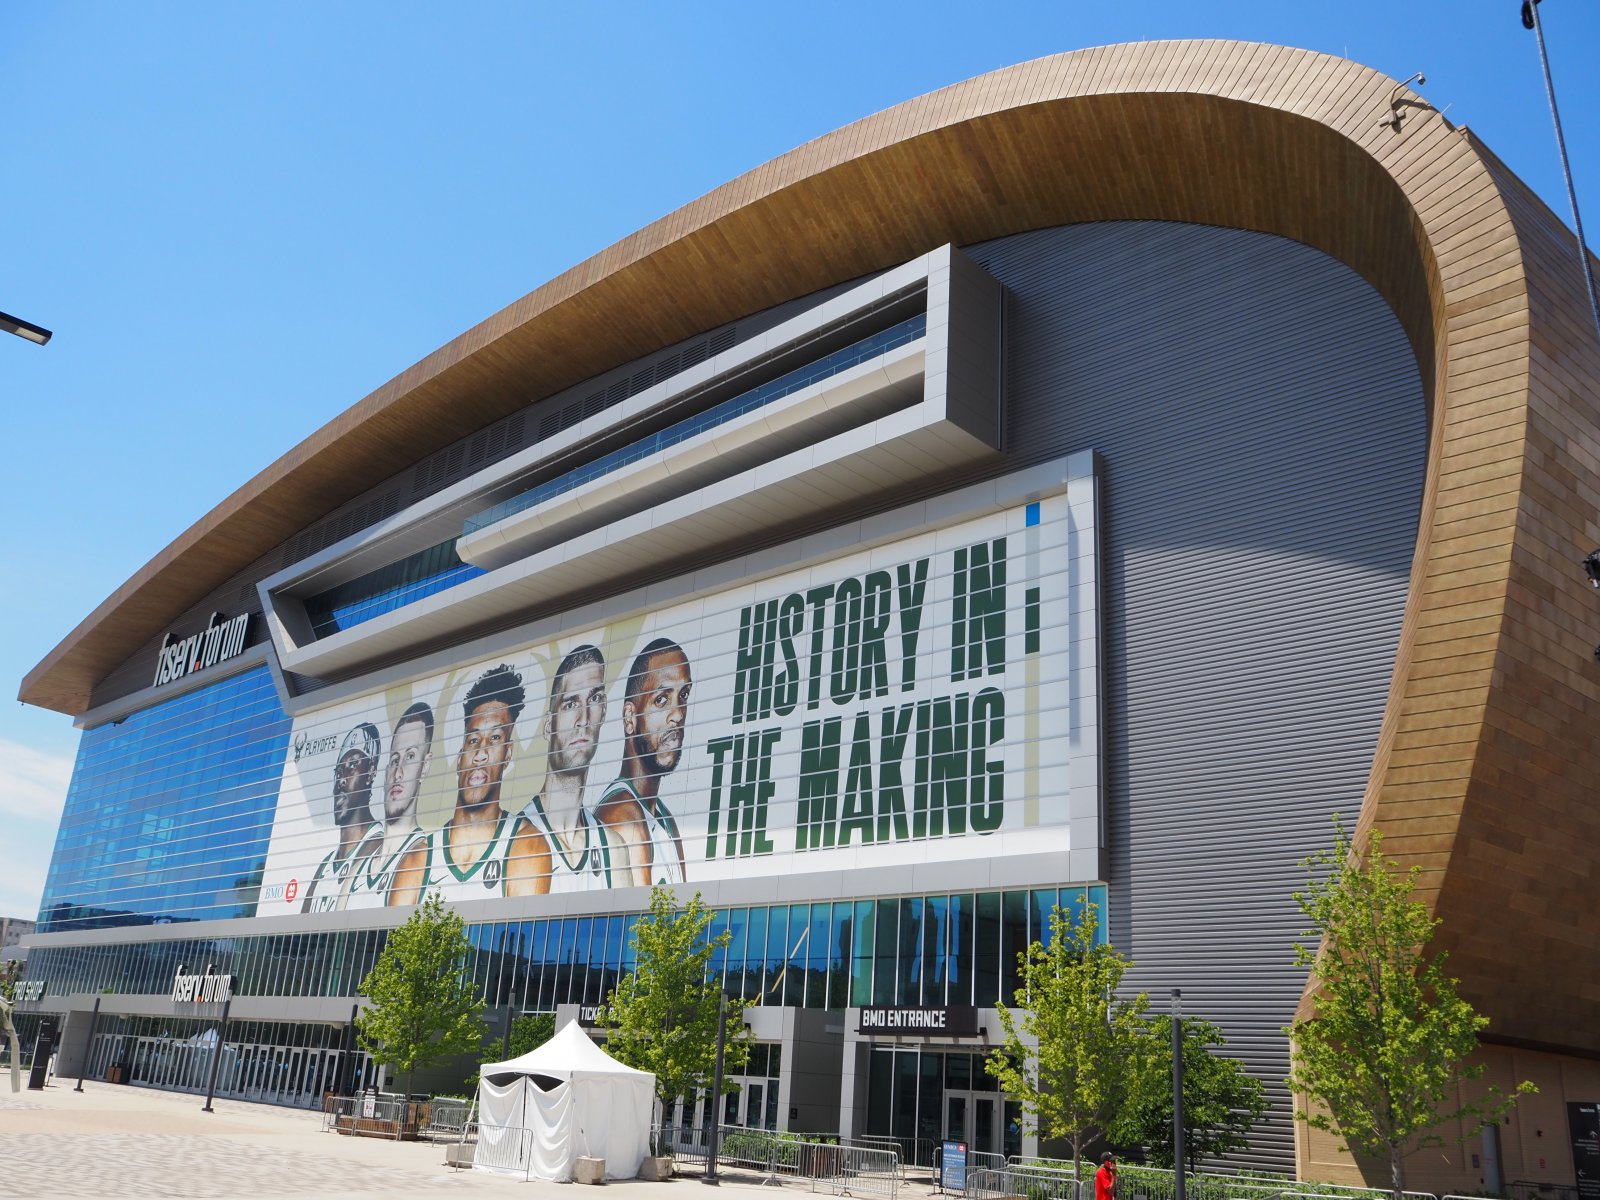 Fiserv Forum during the 2021 playoffs. Photo by Angeline Terry.